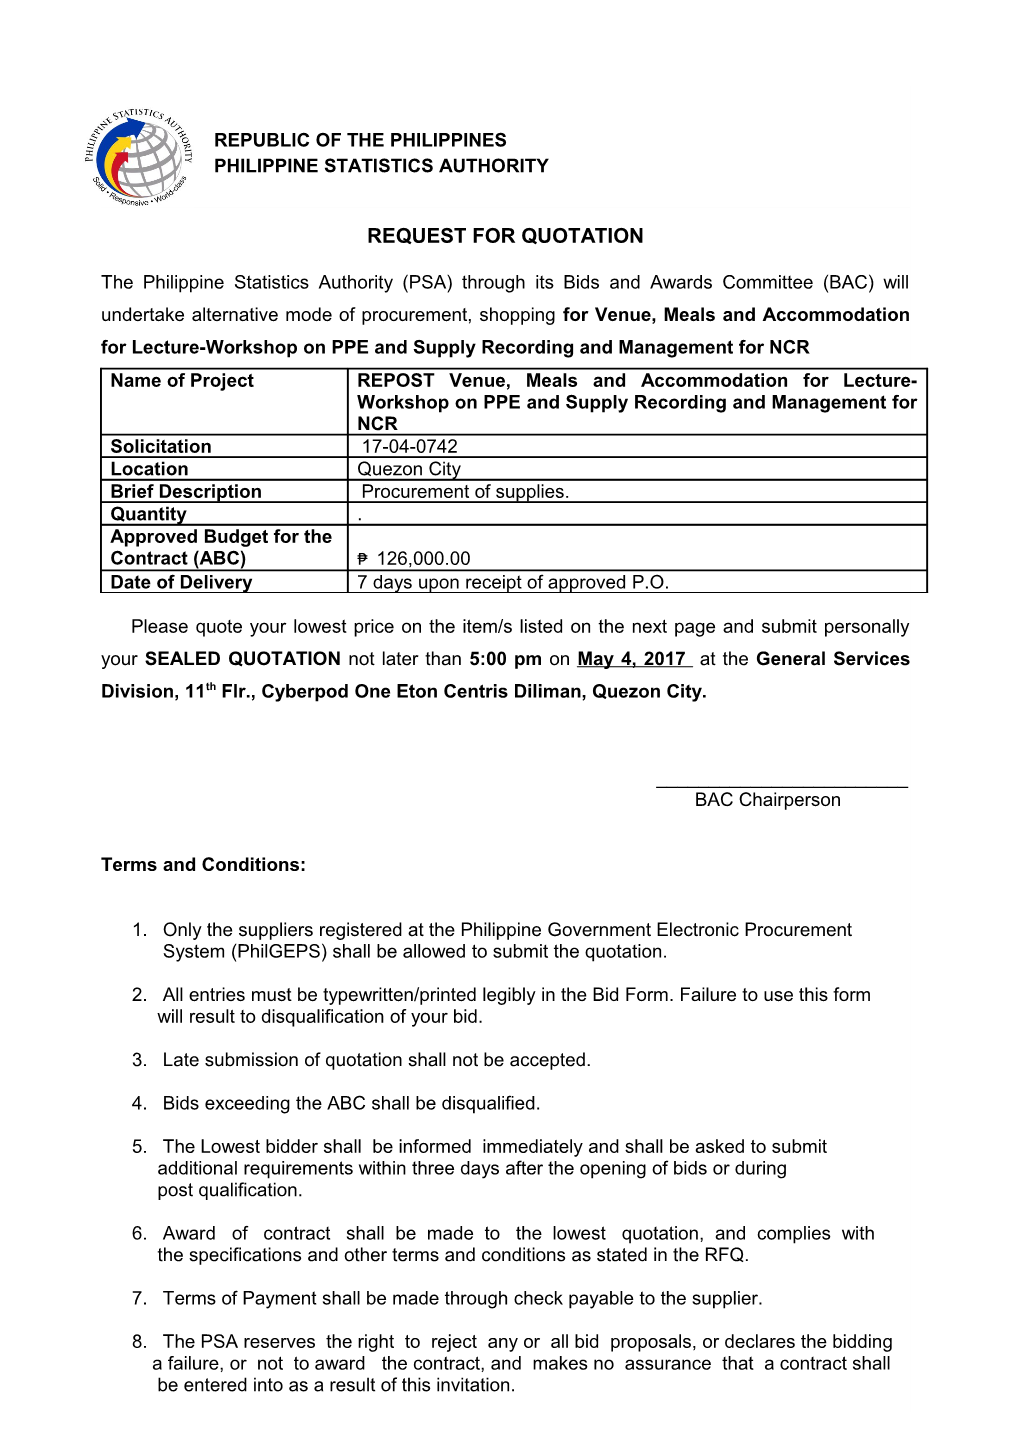 Request for Quotation s46